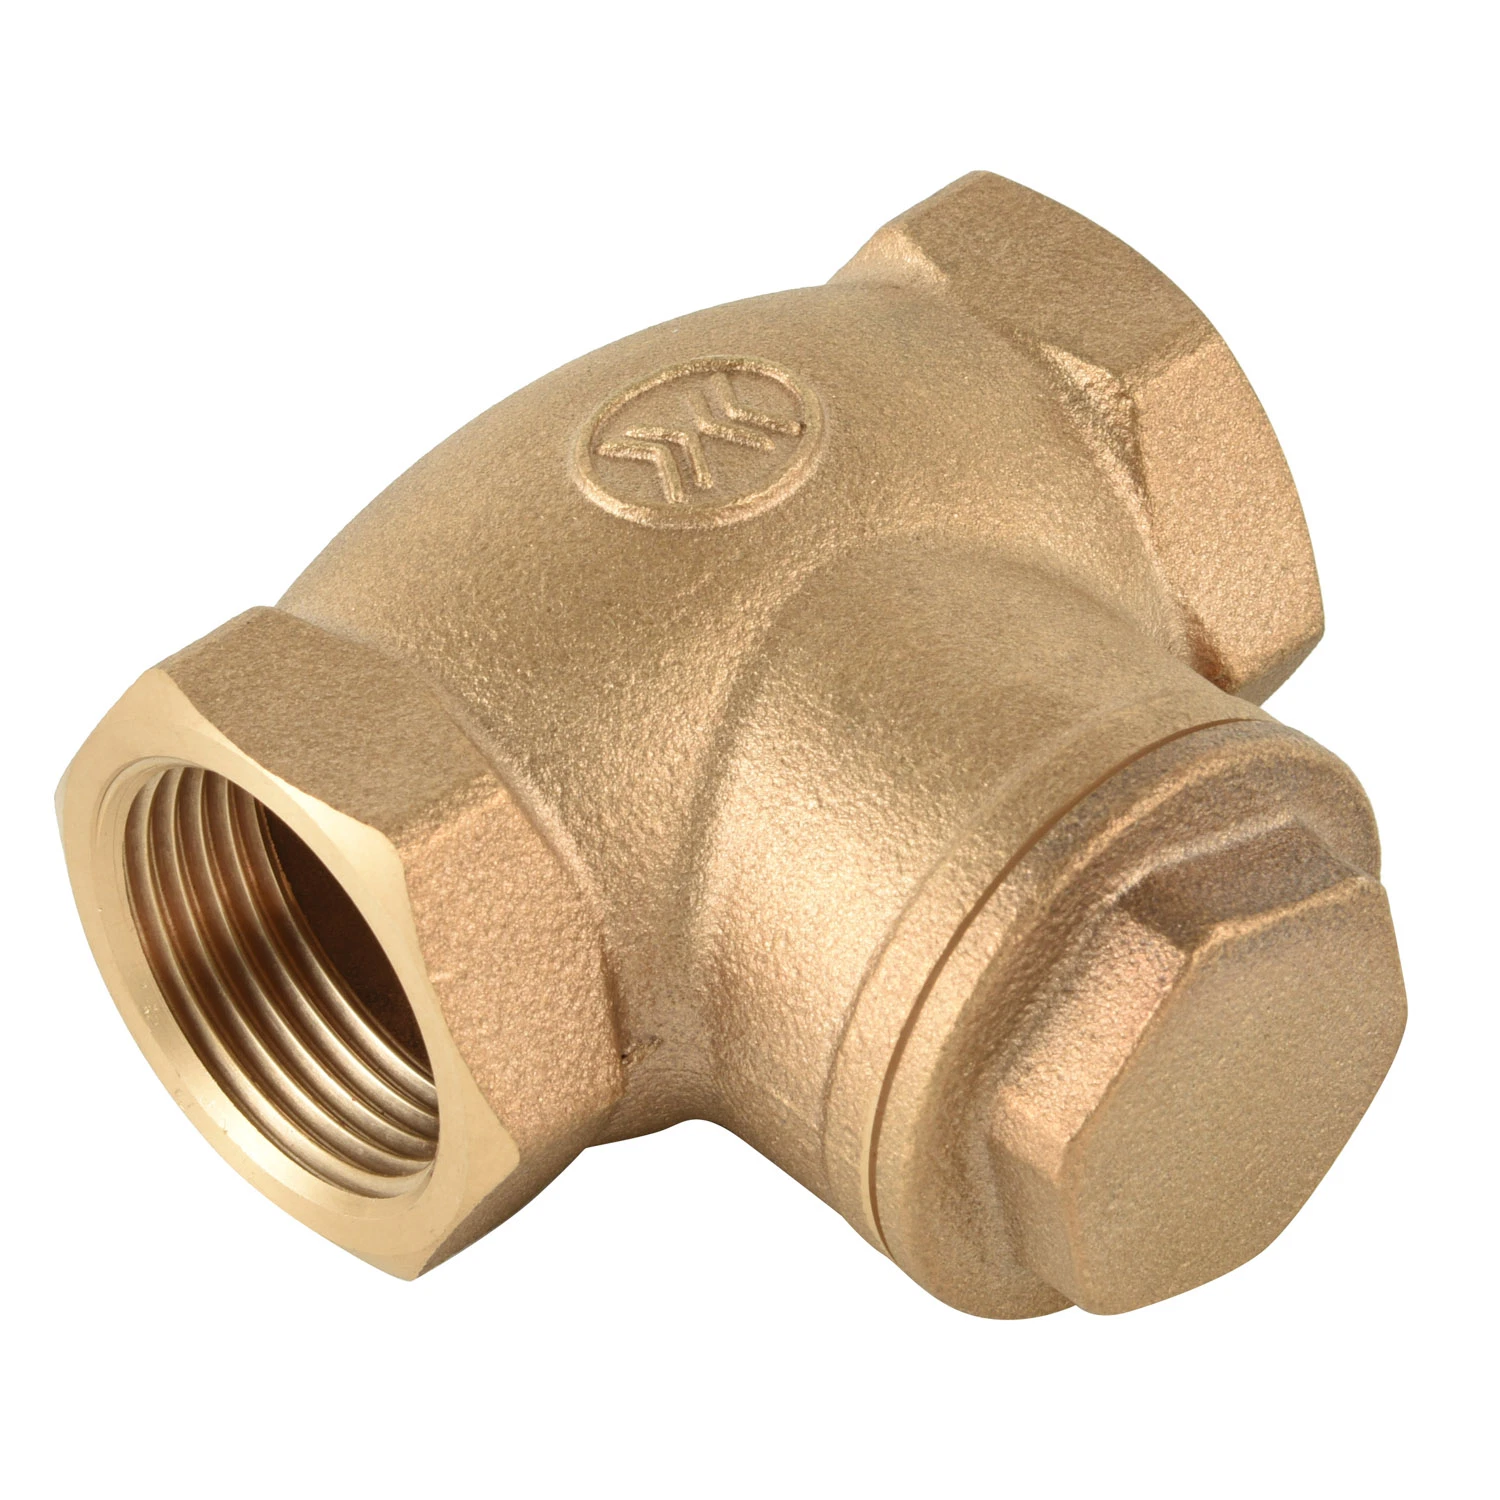 Forged Brass Swing Check Valve Manufacturer From China